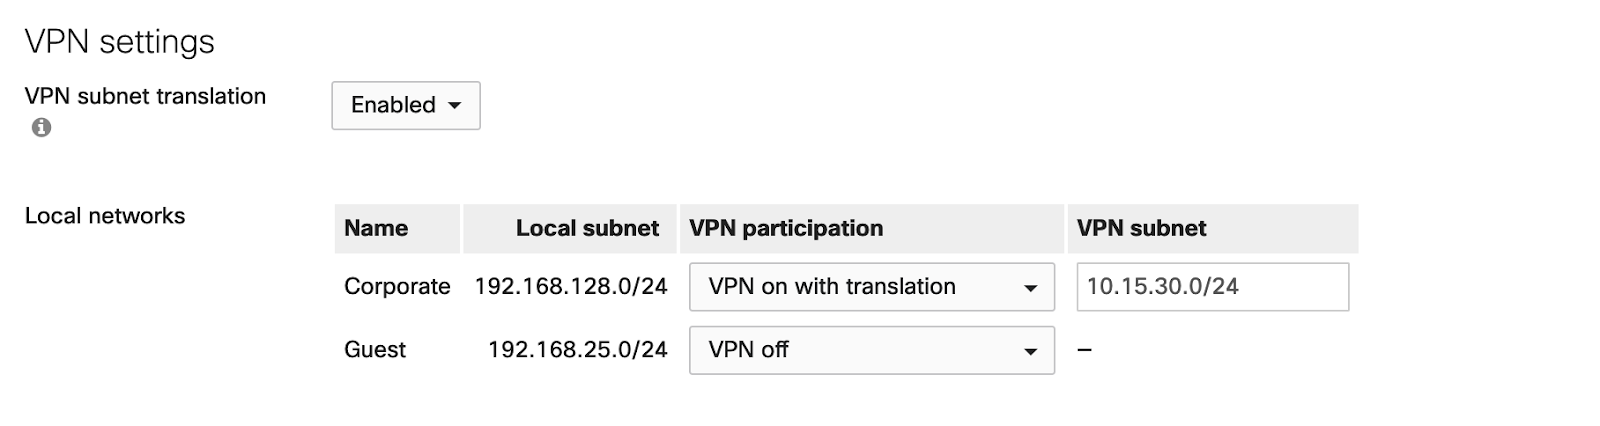 VPN subnet translation enablement in the Dashboard settings